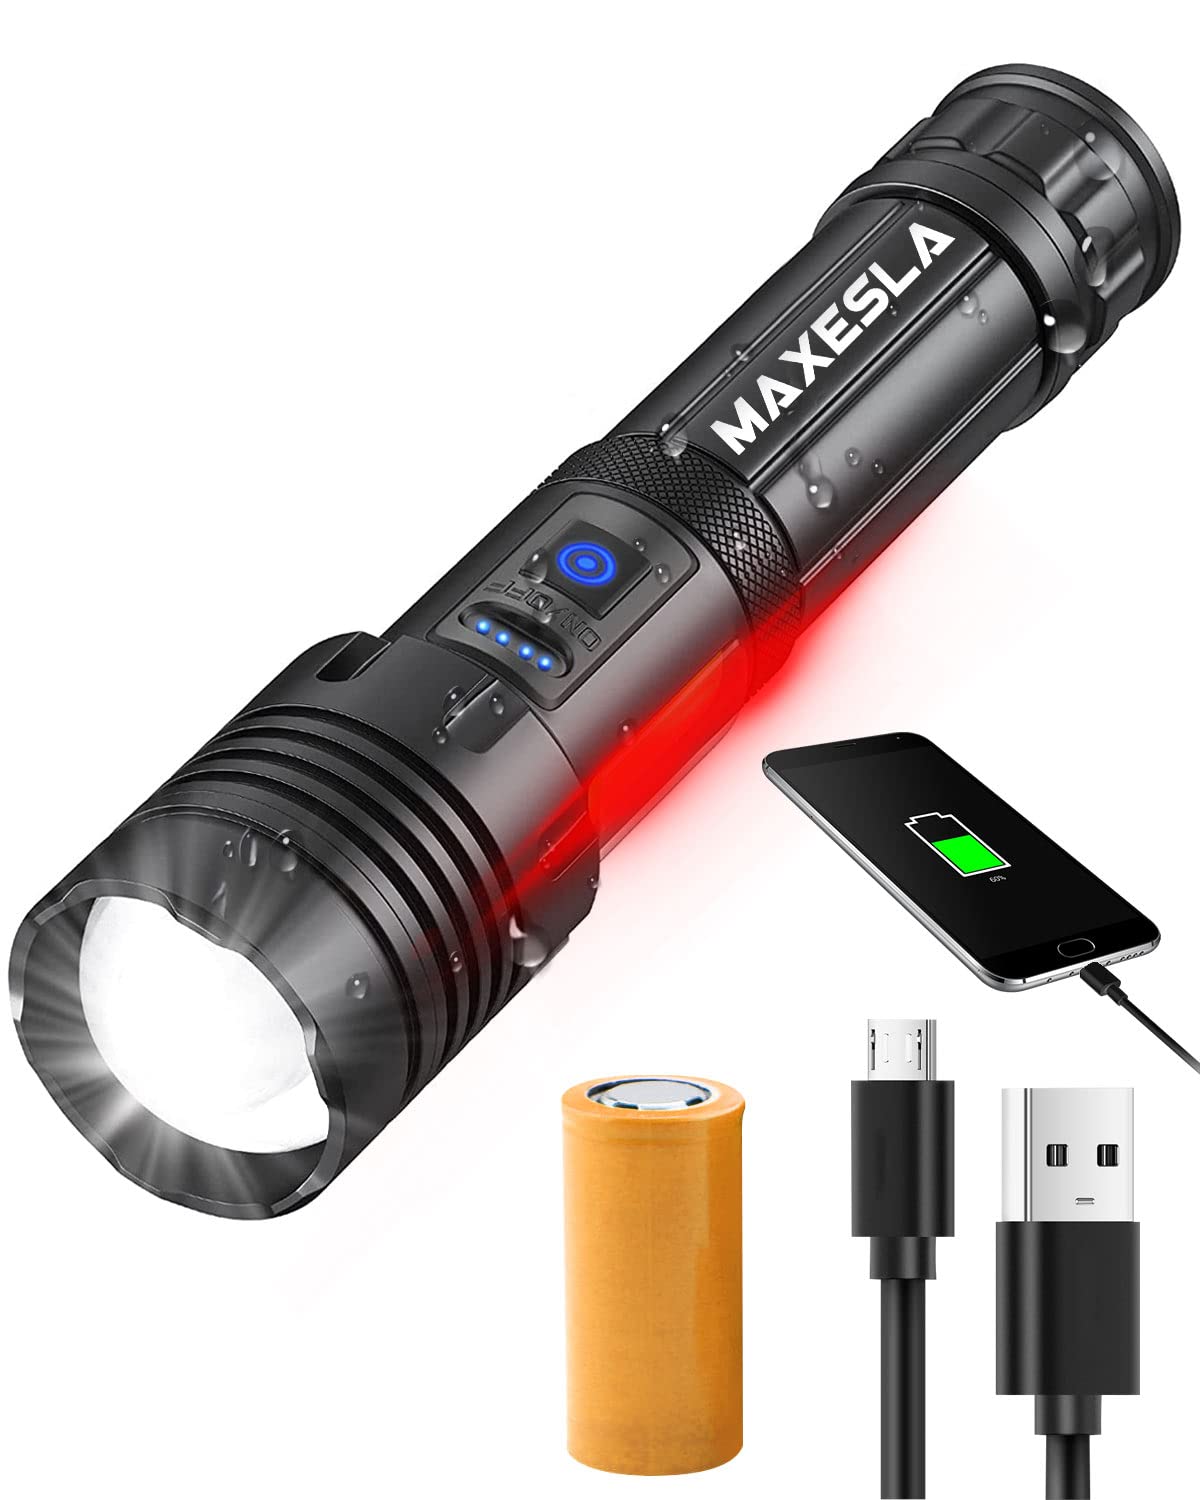 Maxesla COB LED Torch Rechargeable 3000LM, 3000mAh Battery Torches LED Super Bright with Side Light, IPX5 Waterproof Rechargeable Torch 7 Modes Adjustable Focus, Camping torch with USB Port Flashlight